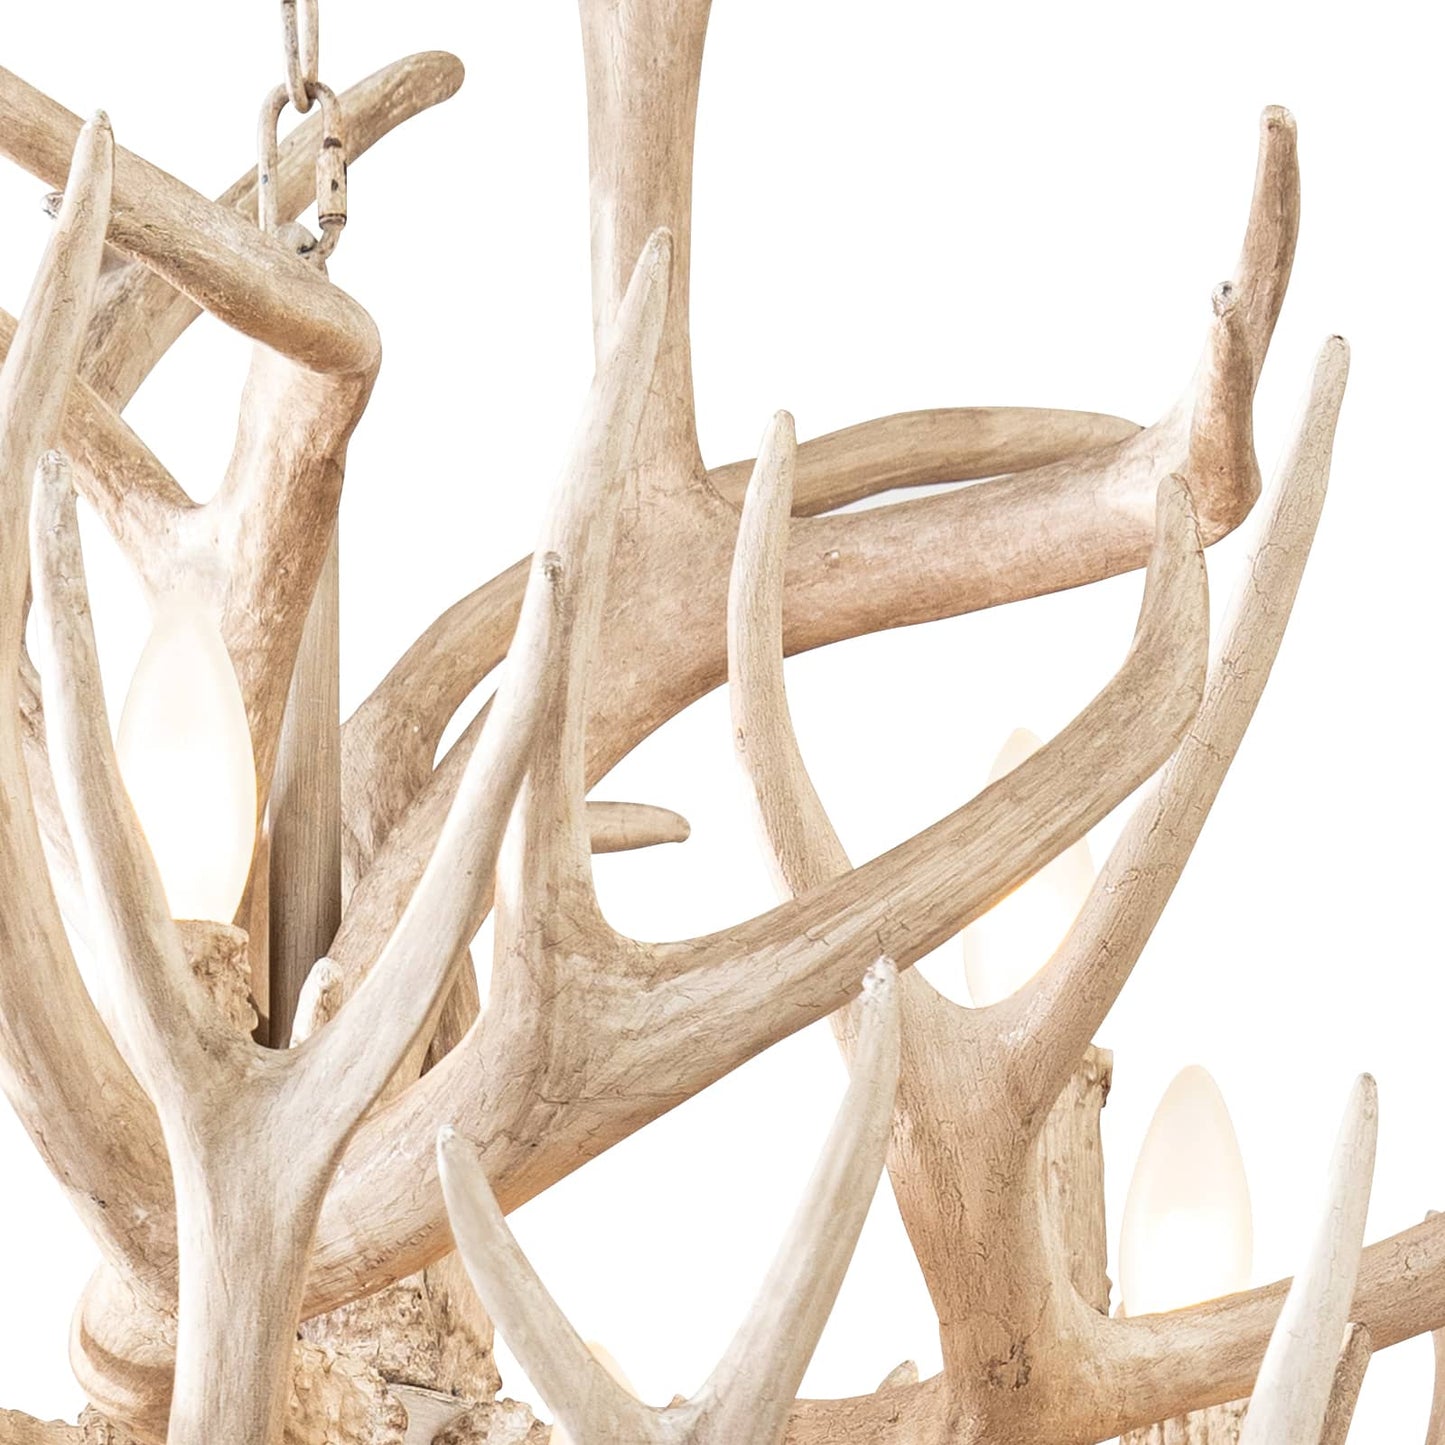 Waylon Antler Chandelier by Southern Living